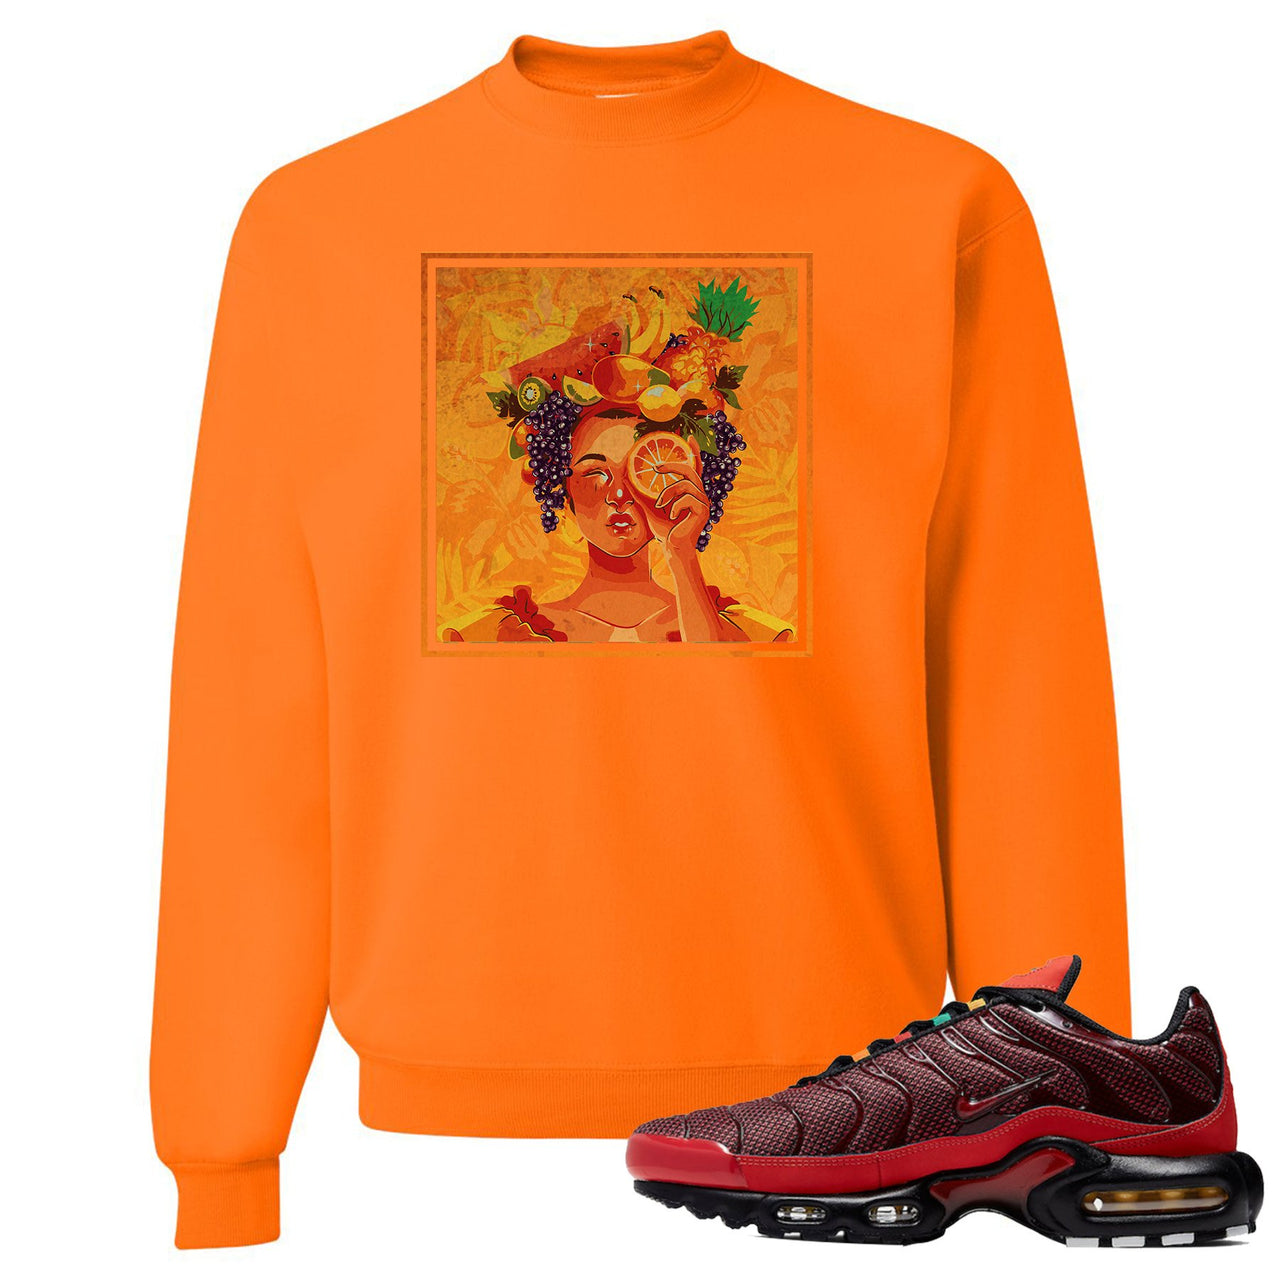 Printed on the front of the Air Max Plus Sunburst sneaker matching safety orange crewneck sweatshirt is the lady fruit logo